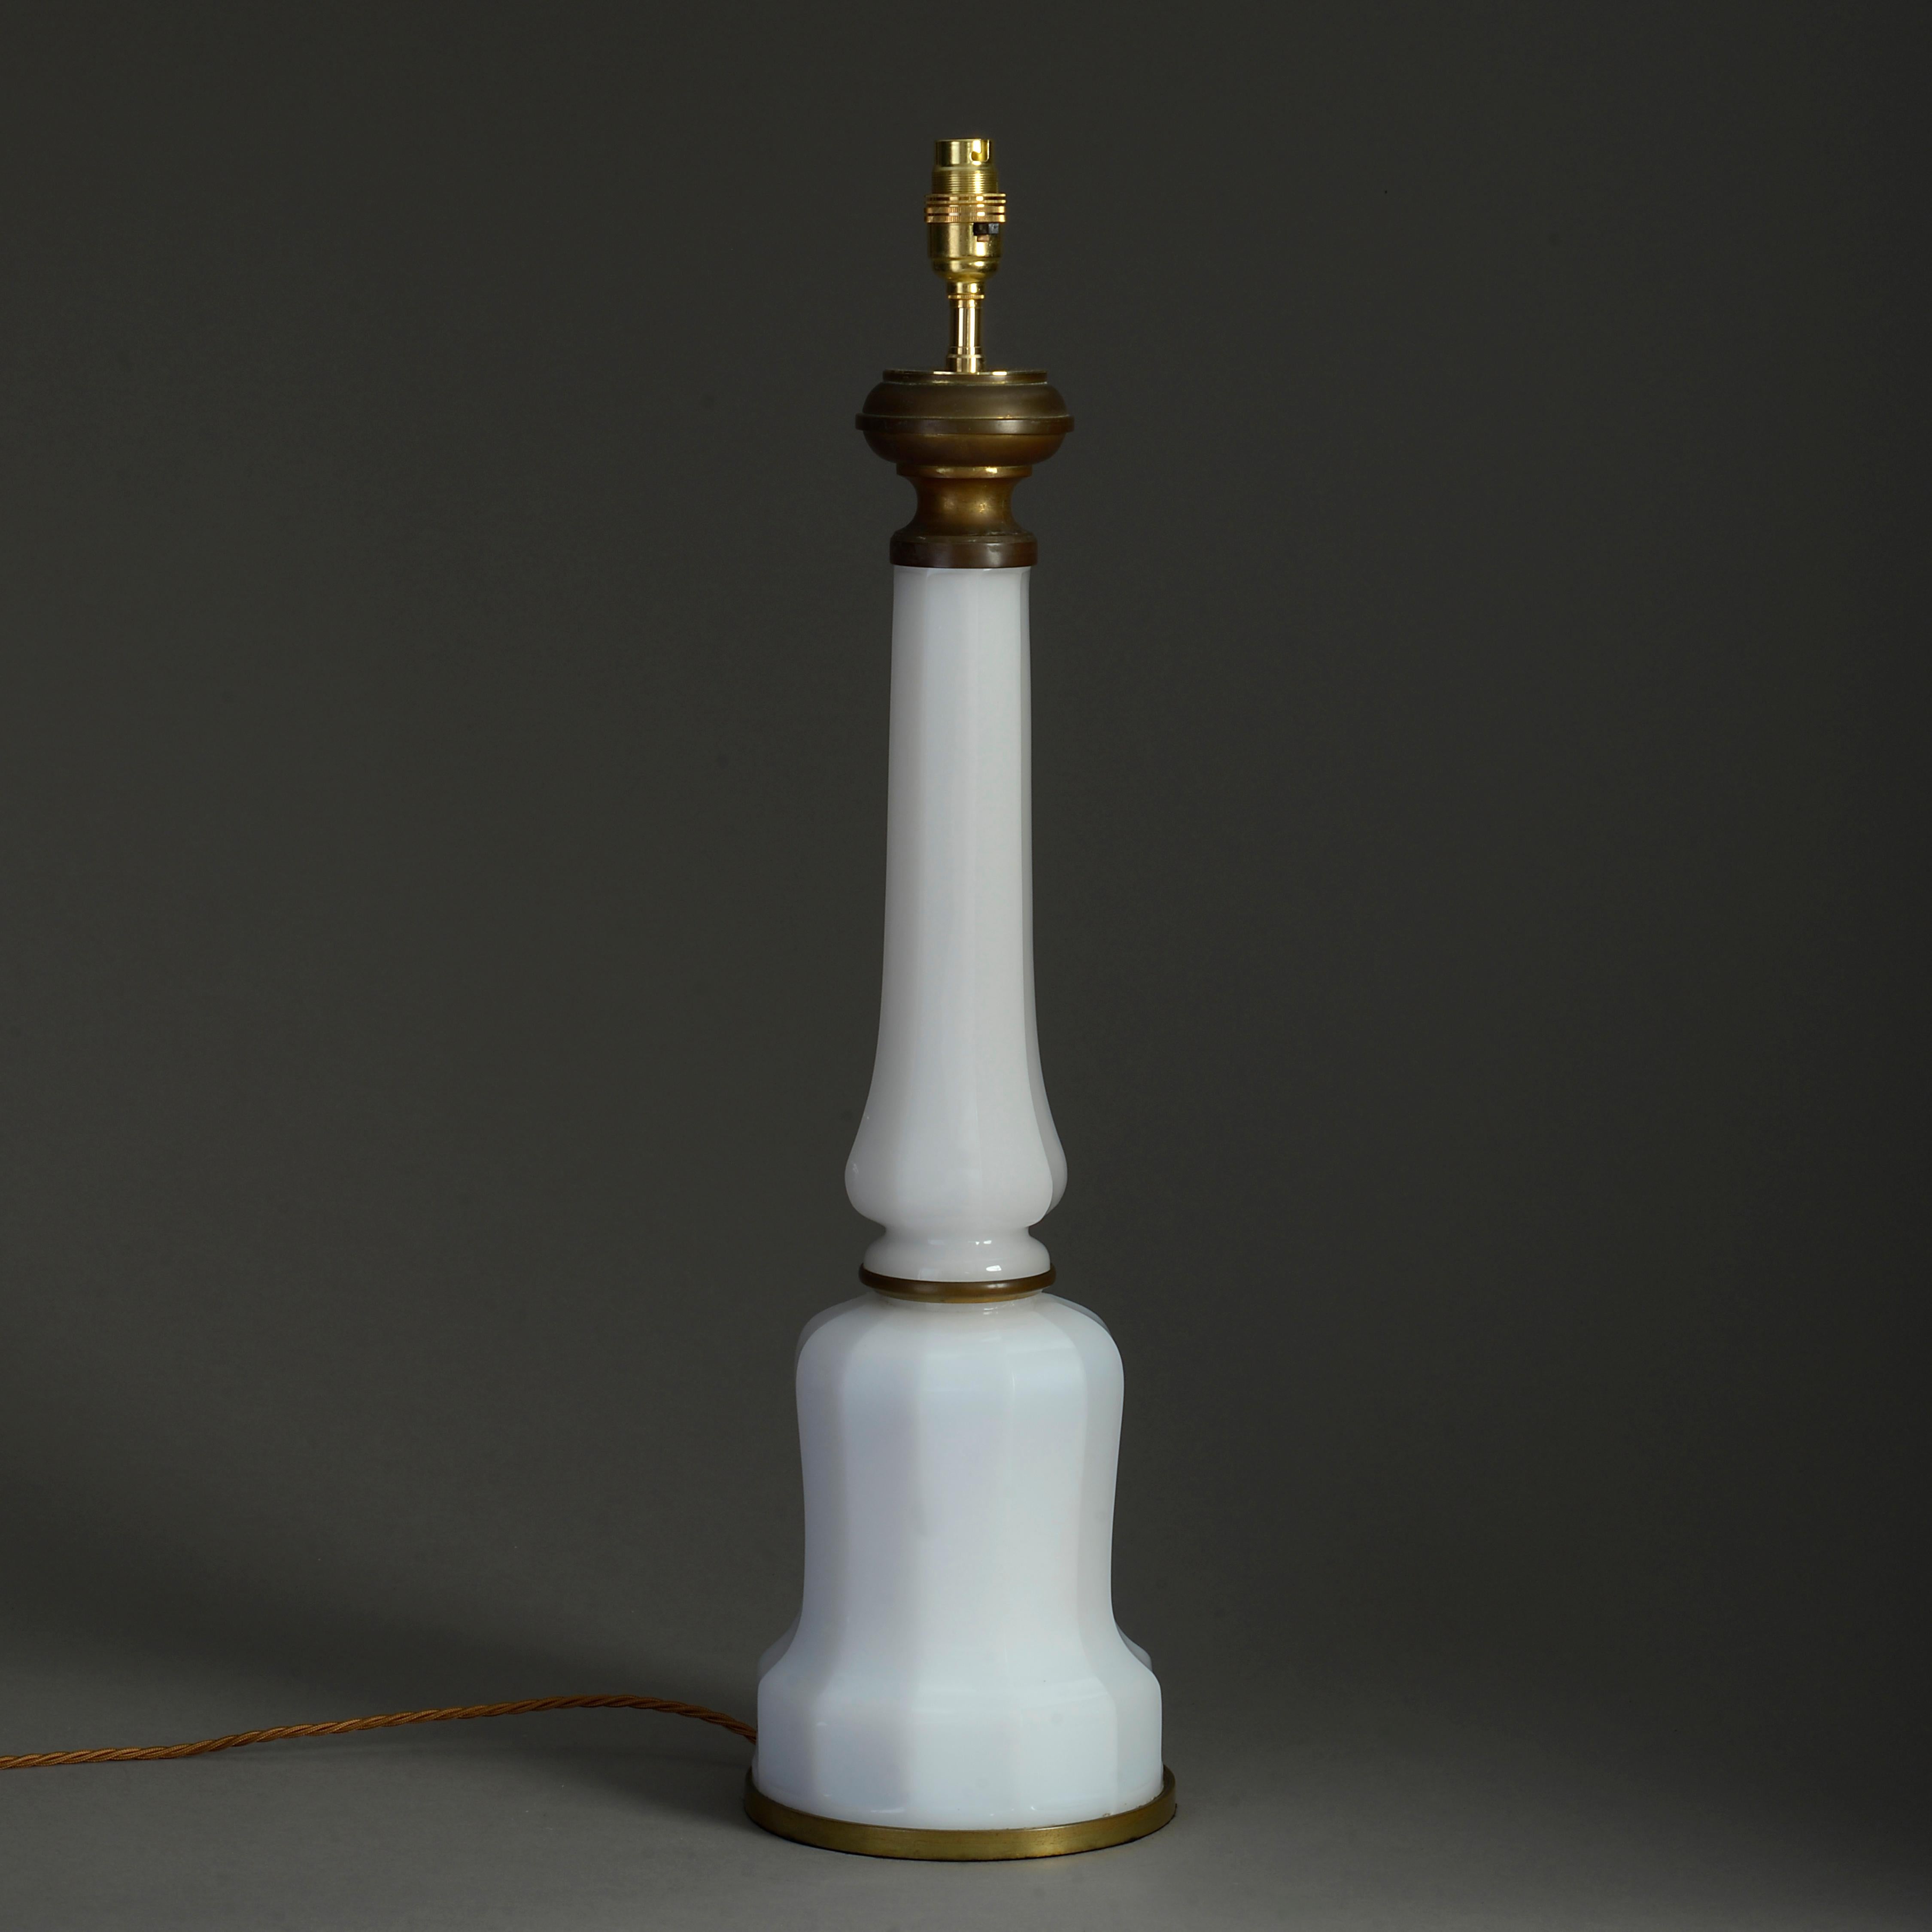 A mid-nineteenth century early Victorian Period white opaline glass lamp base, of shaped, faceted mallet form, having a brass top, collar and base.

Wired as an electric lamp. Dimensions refer to antique elements only.

Shade not included.